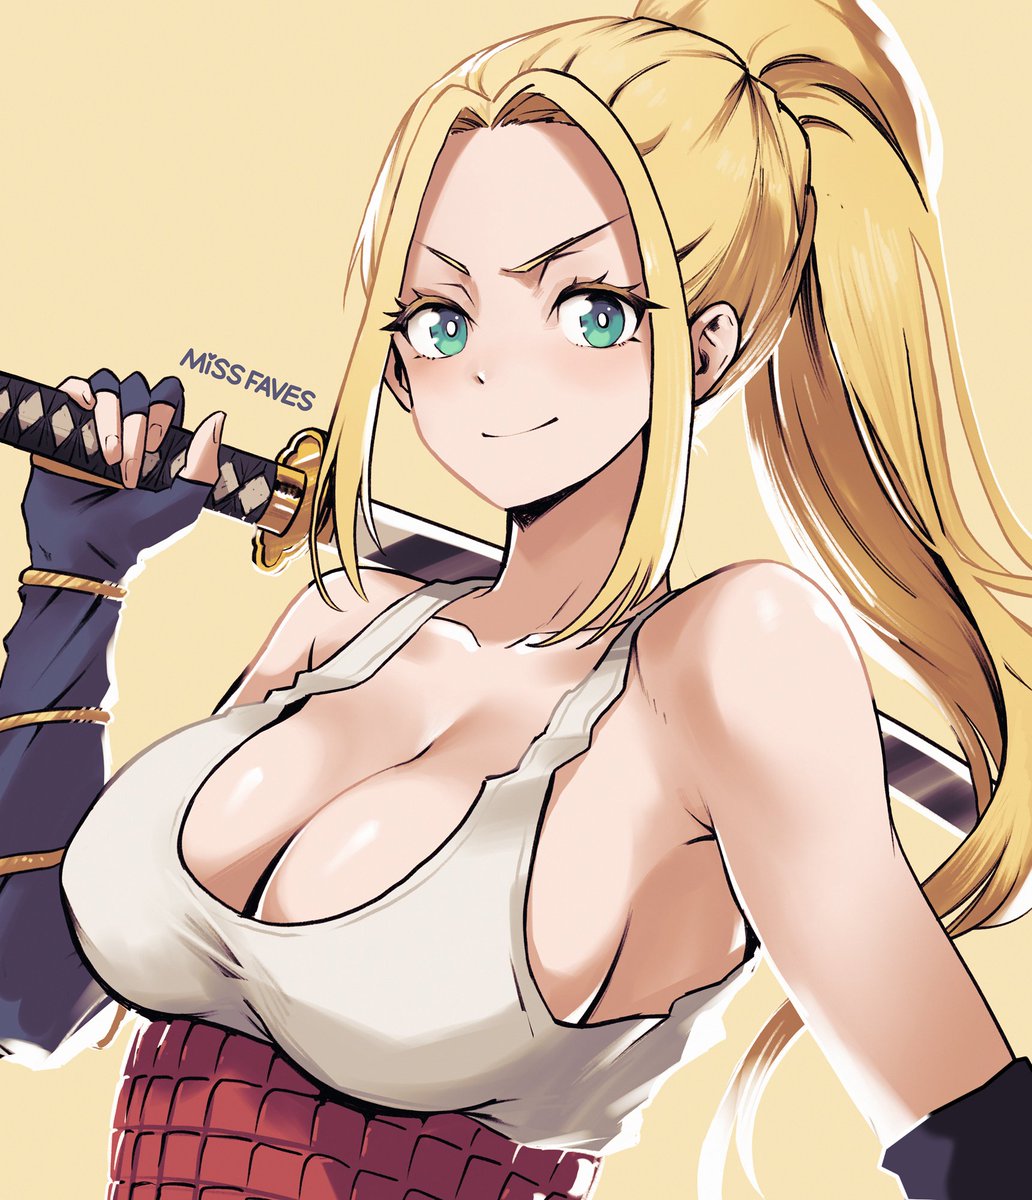 armor beatrix_amerhauser black_gloves blonde_hair blue_eyes breasts cleavage closed_mouth commentary english_commentary female fingerless_gloves gloves high_ponytail highres holding holding_sword holding_weapon japanese_armor katana kusazuri large_breasts long_hair looking_at_viewer missfaves over_shoulder smile solo sword sword_over_shoulder tank_top upper_body weapon weapon_over_shoulder white_tank_top yellow_background zom_100:_zombie_ni_naru_made_ni_shitai_100_no_koto zom_100_zombie_ni_naru_made_ni_shitai_100_no_koto